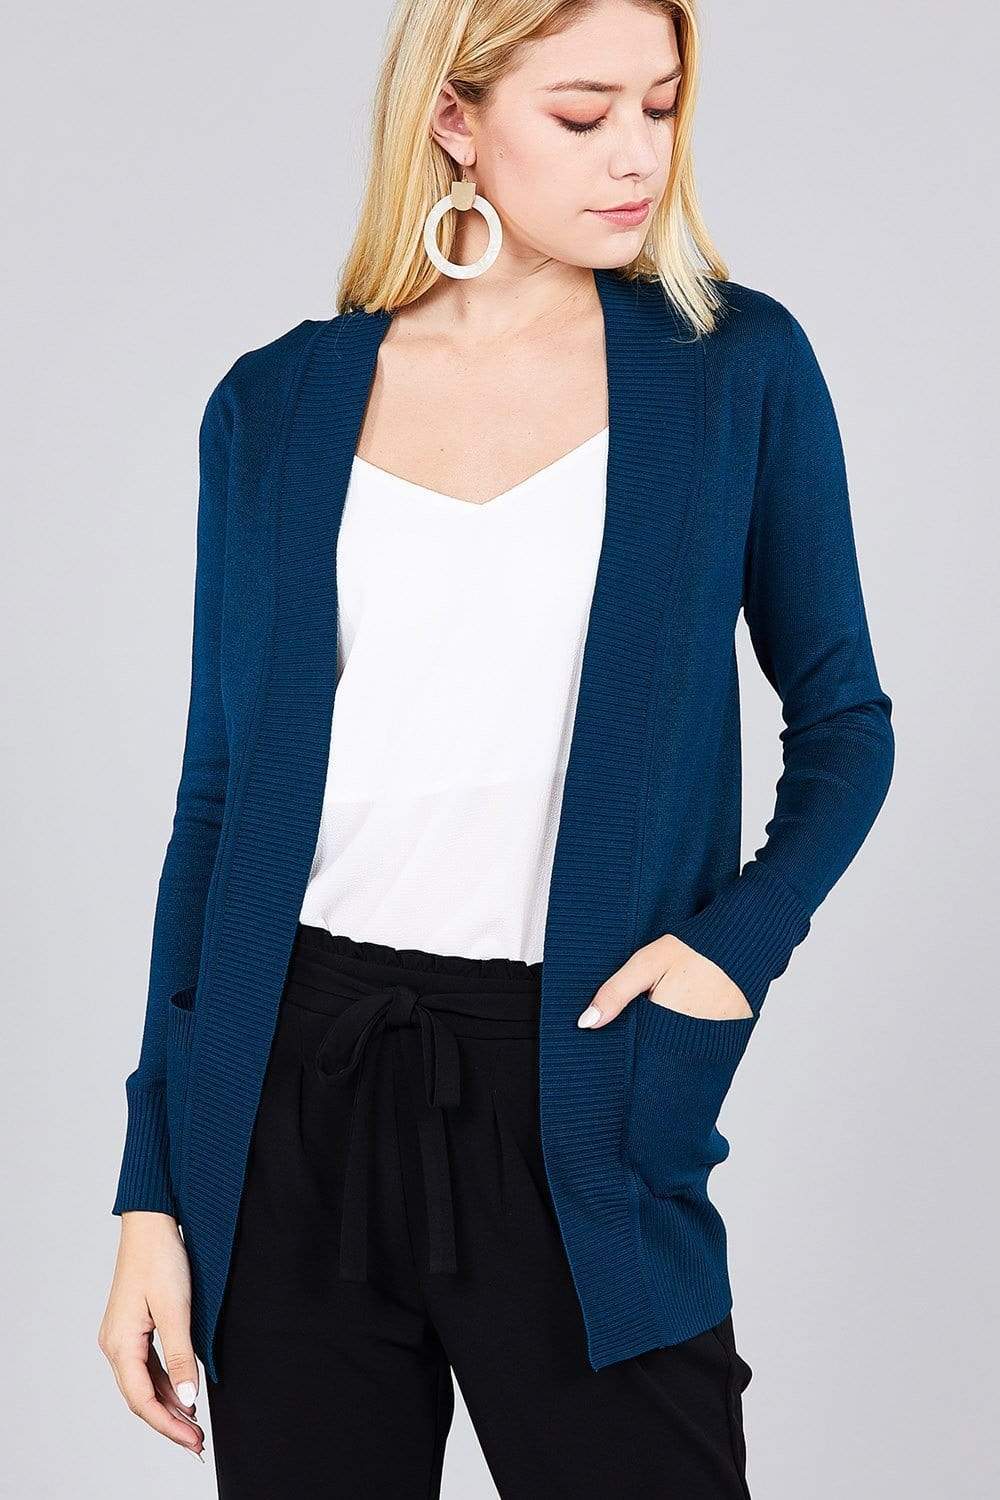 Long Sleeve Rib Banded Open Sweater Cardigan With Pockets-TOPS / DRESSES-[Adult]-[Female]-Dark Teal-S-Blue Zone Planet